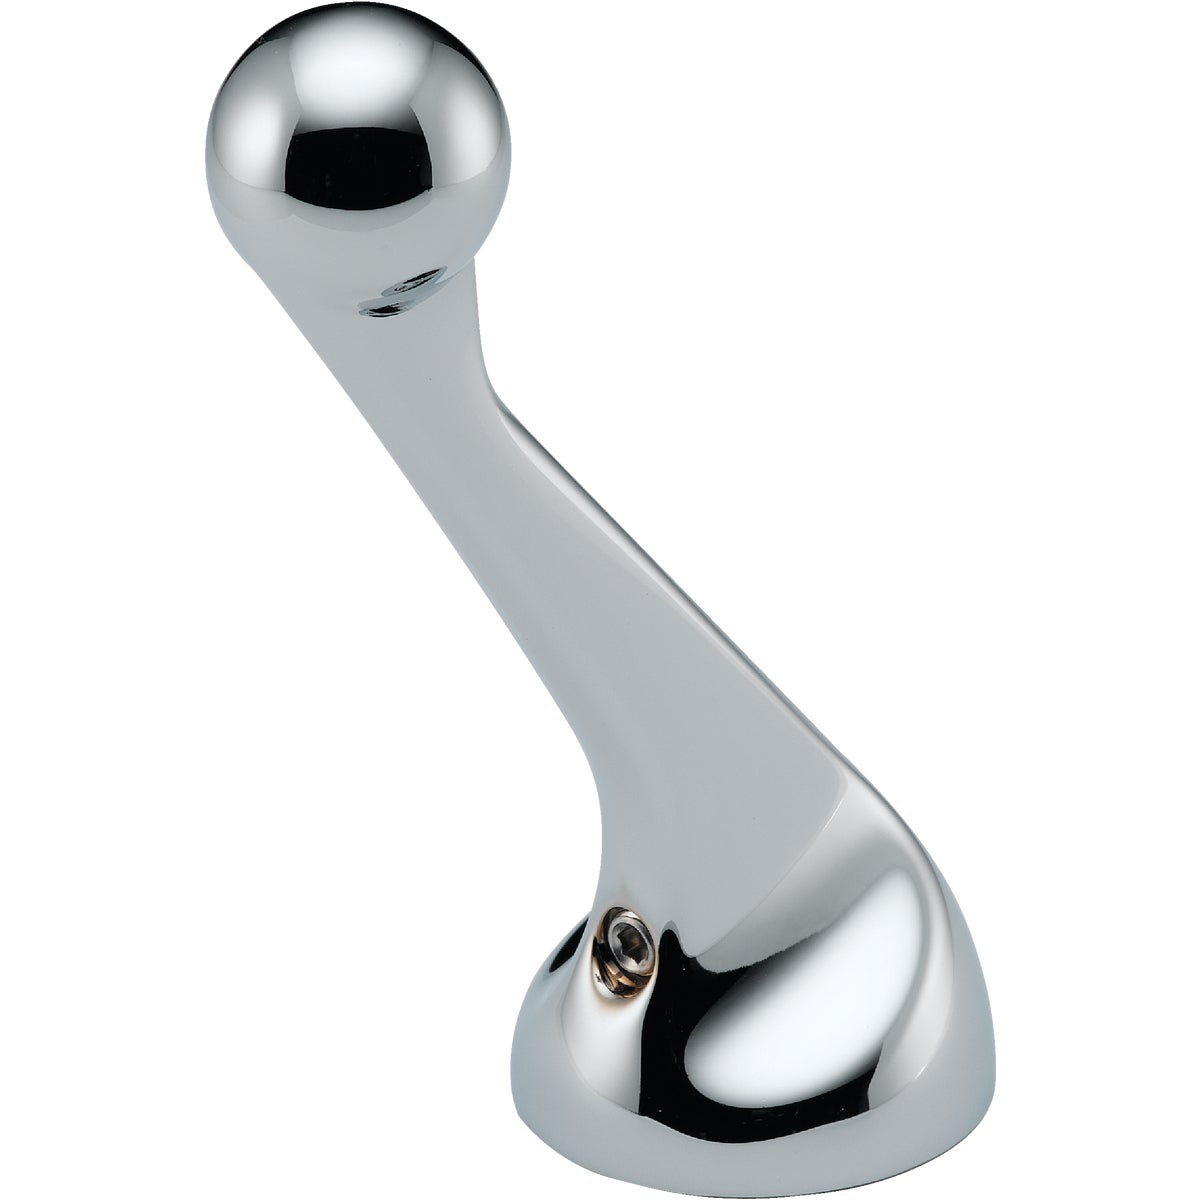 Item 462209, Lever handle with set screw for kitchen faucets, model No.